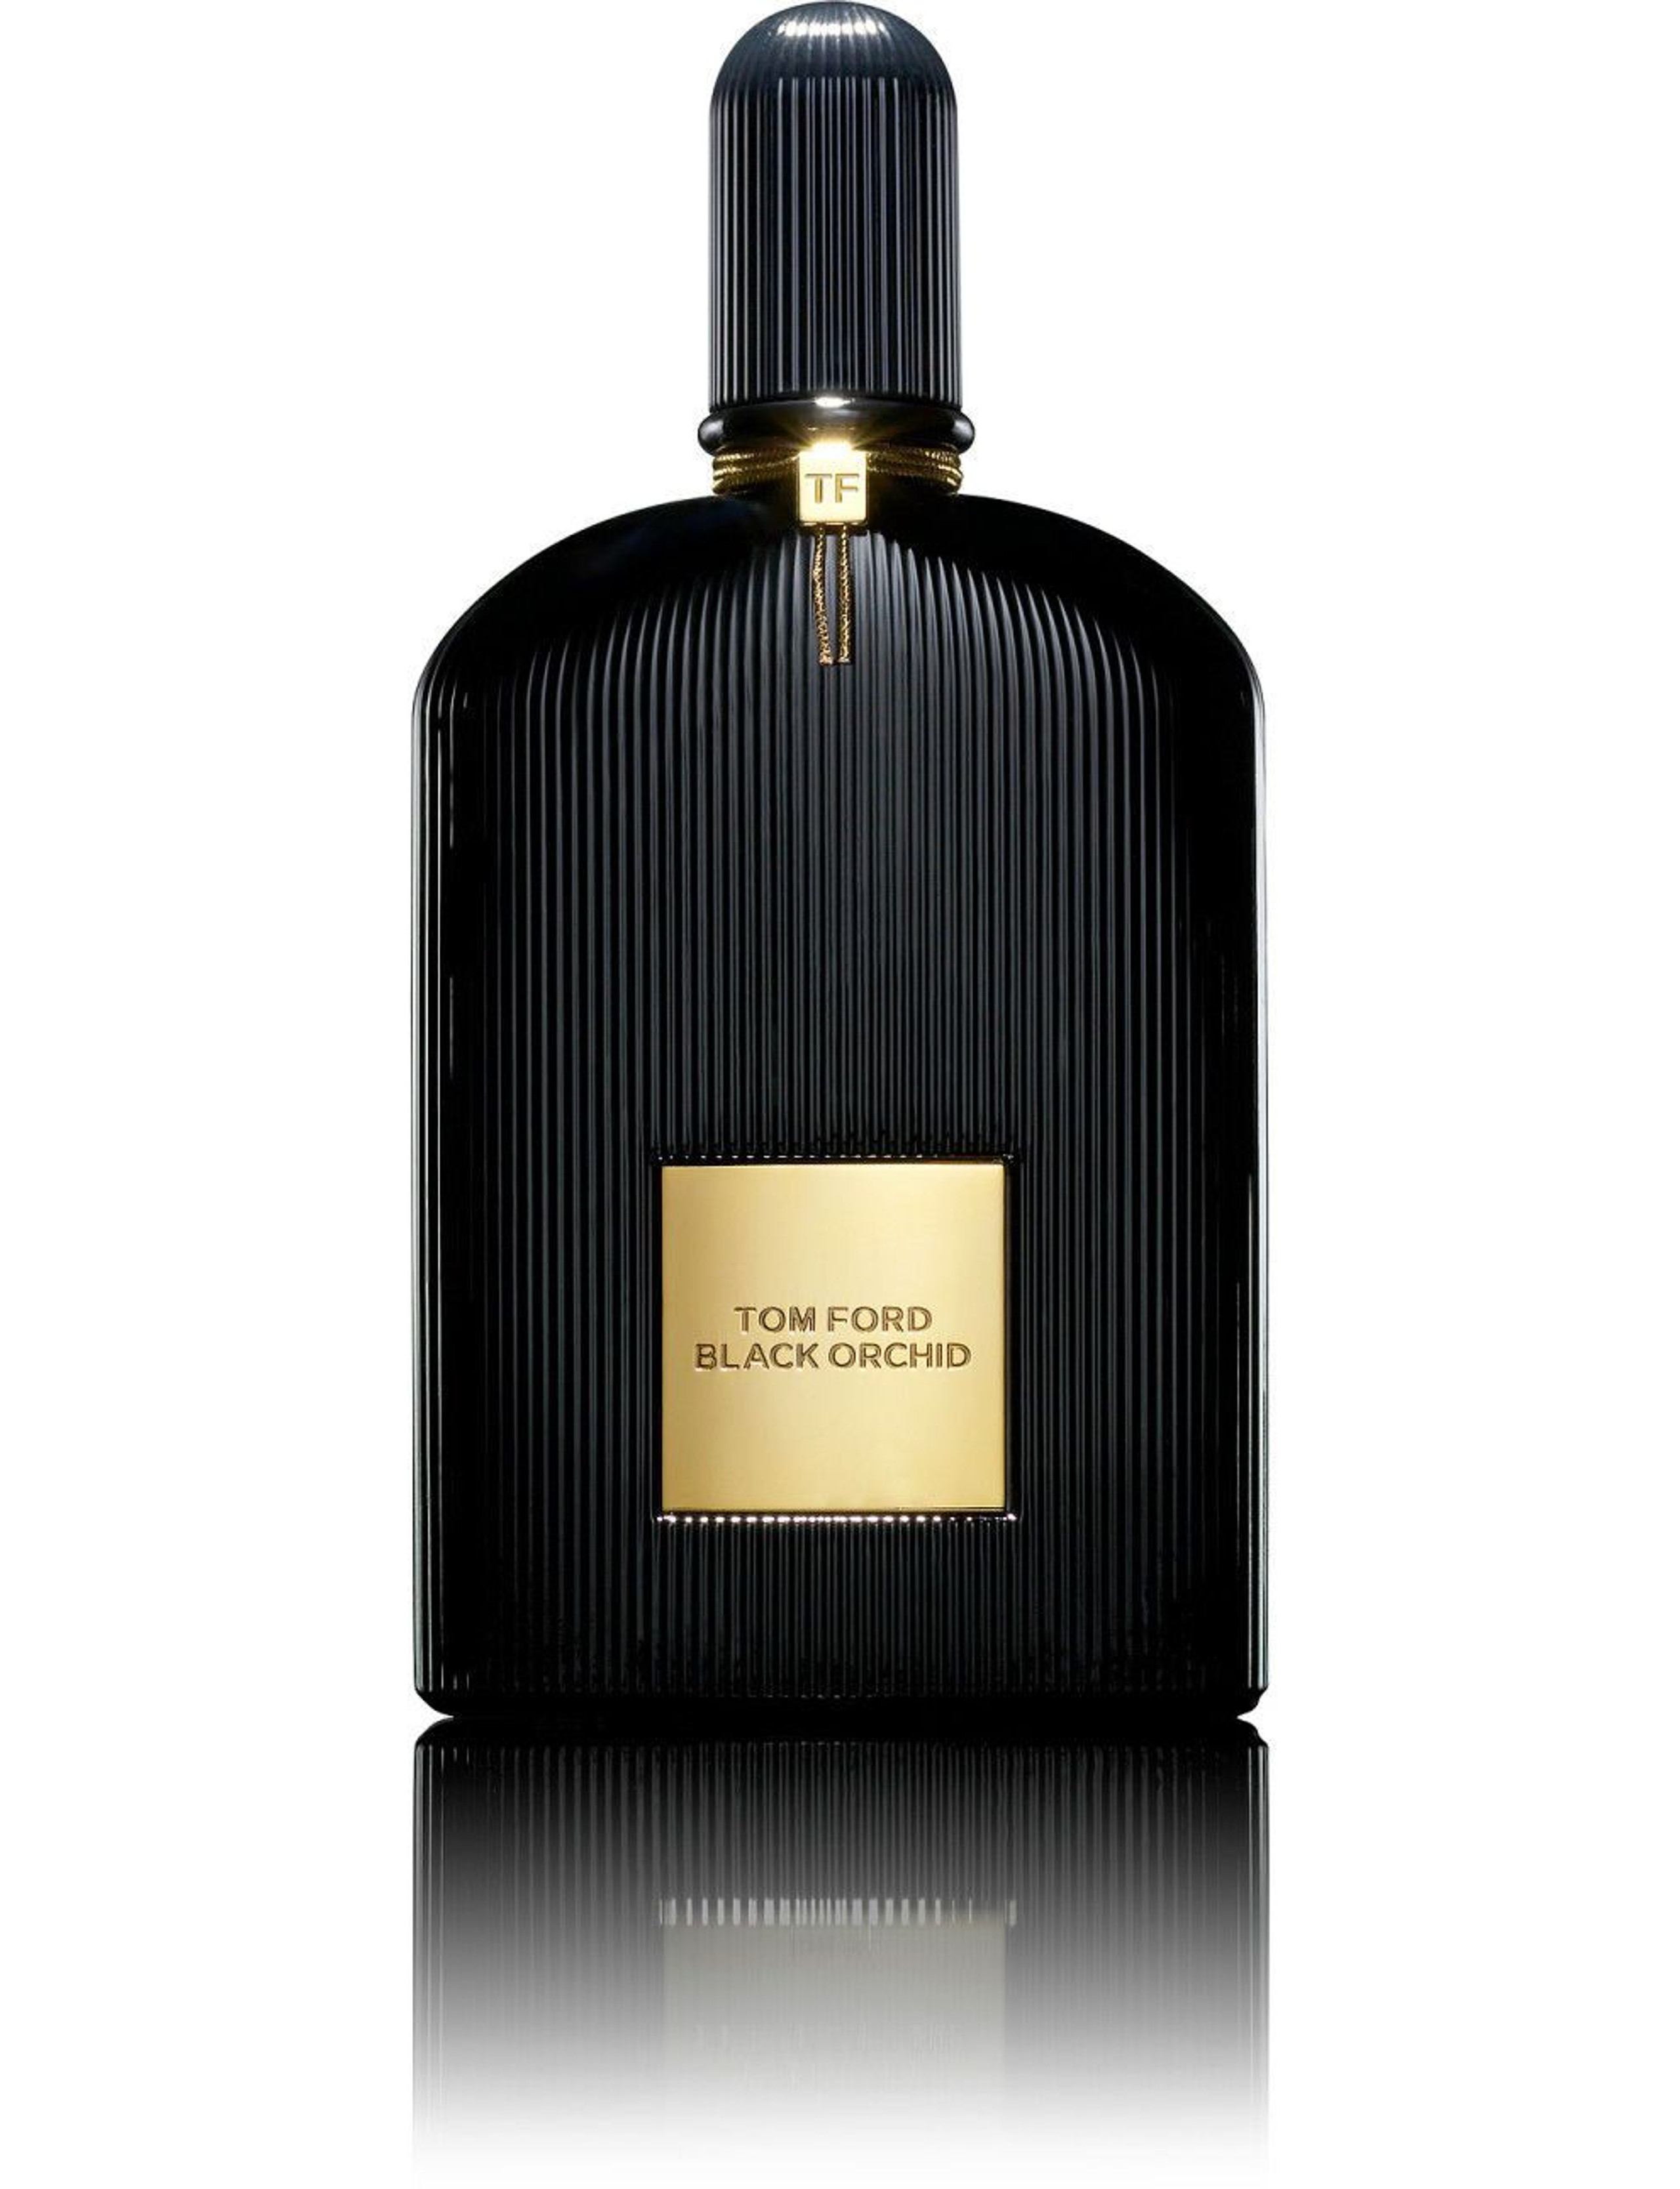 TOM FORD - The Perfume & Beauty Store